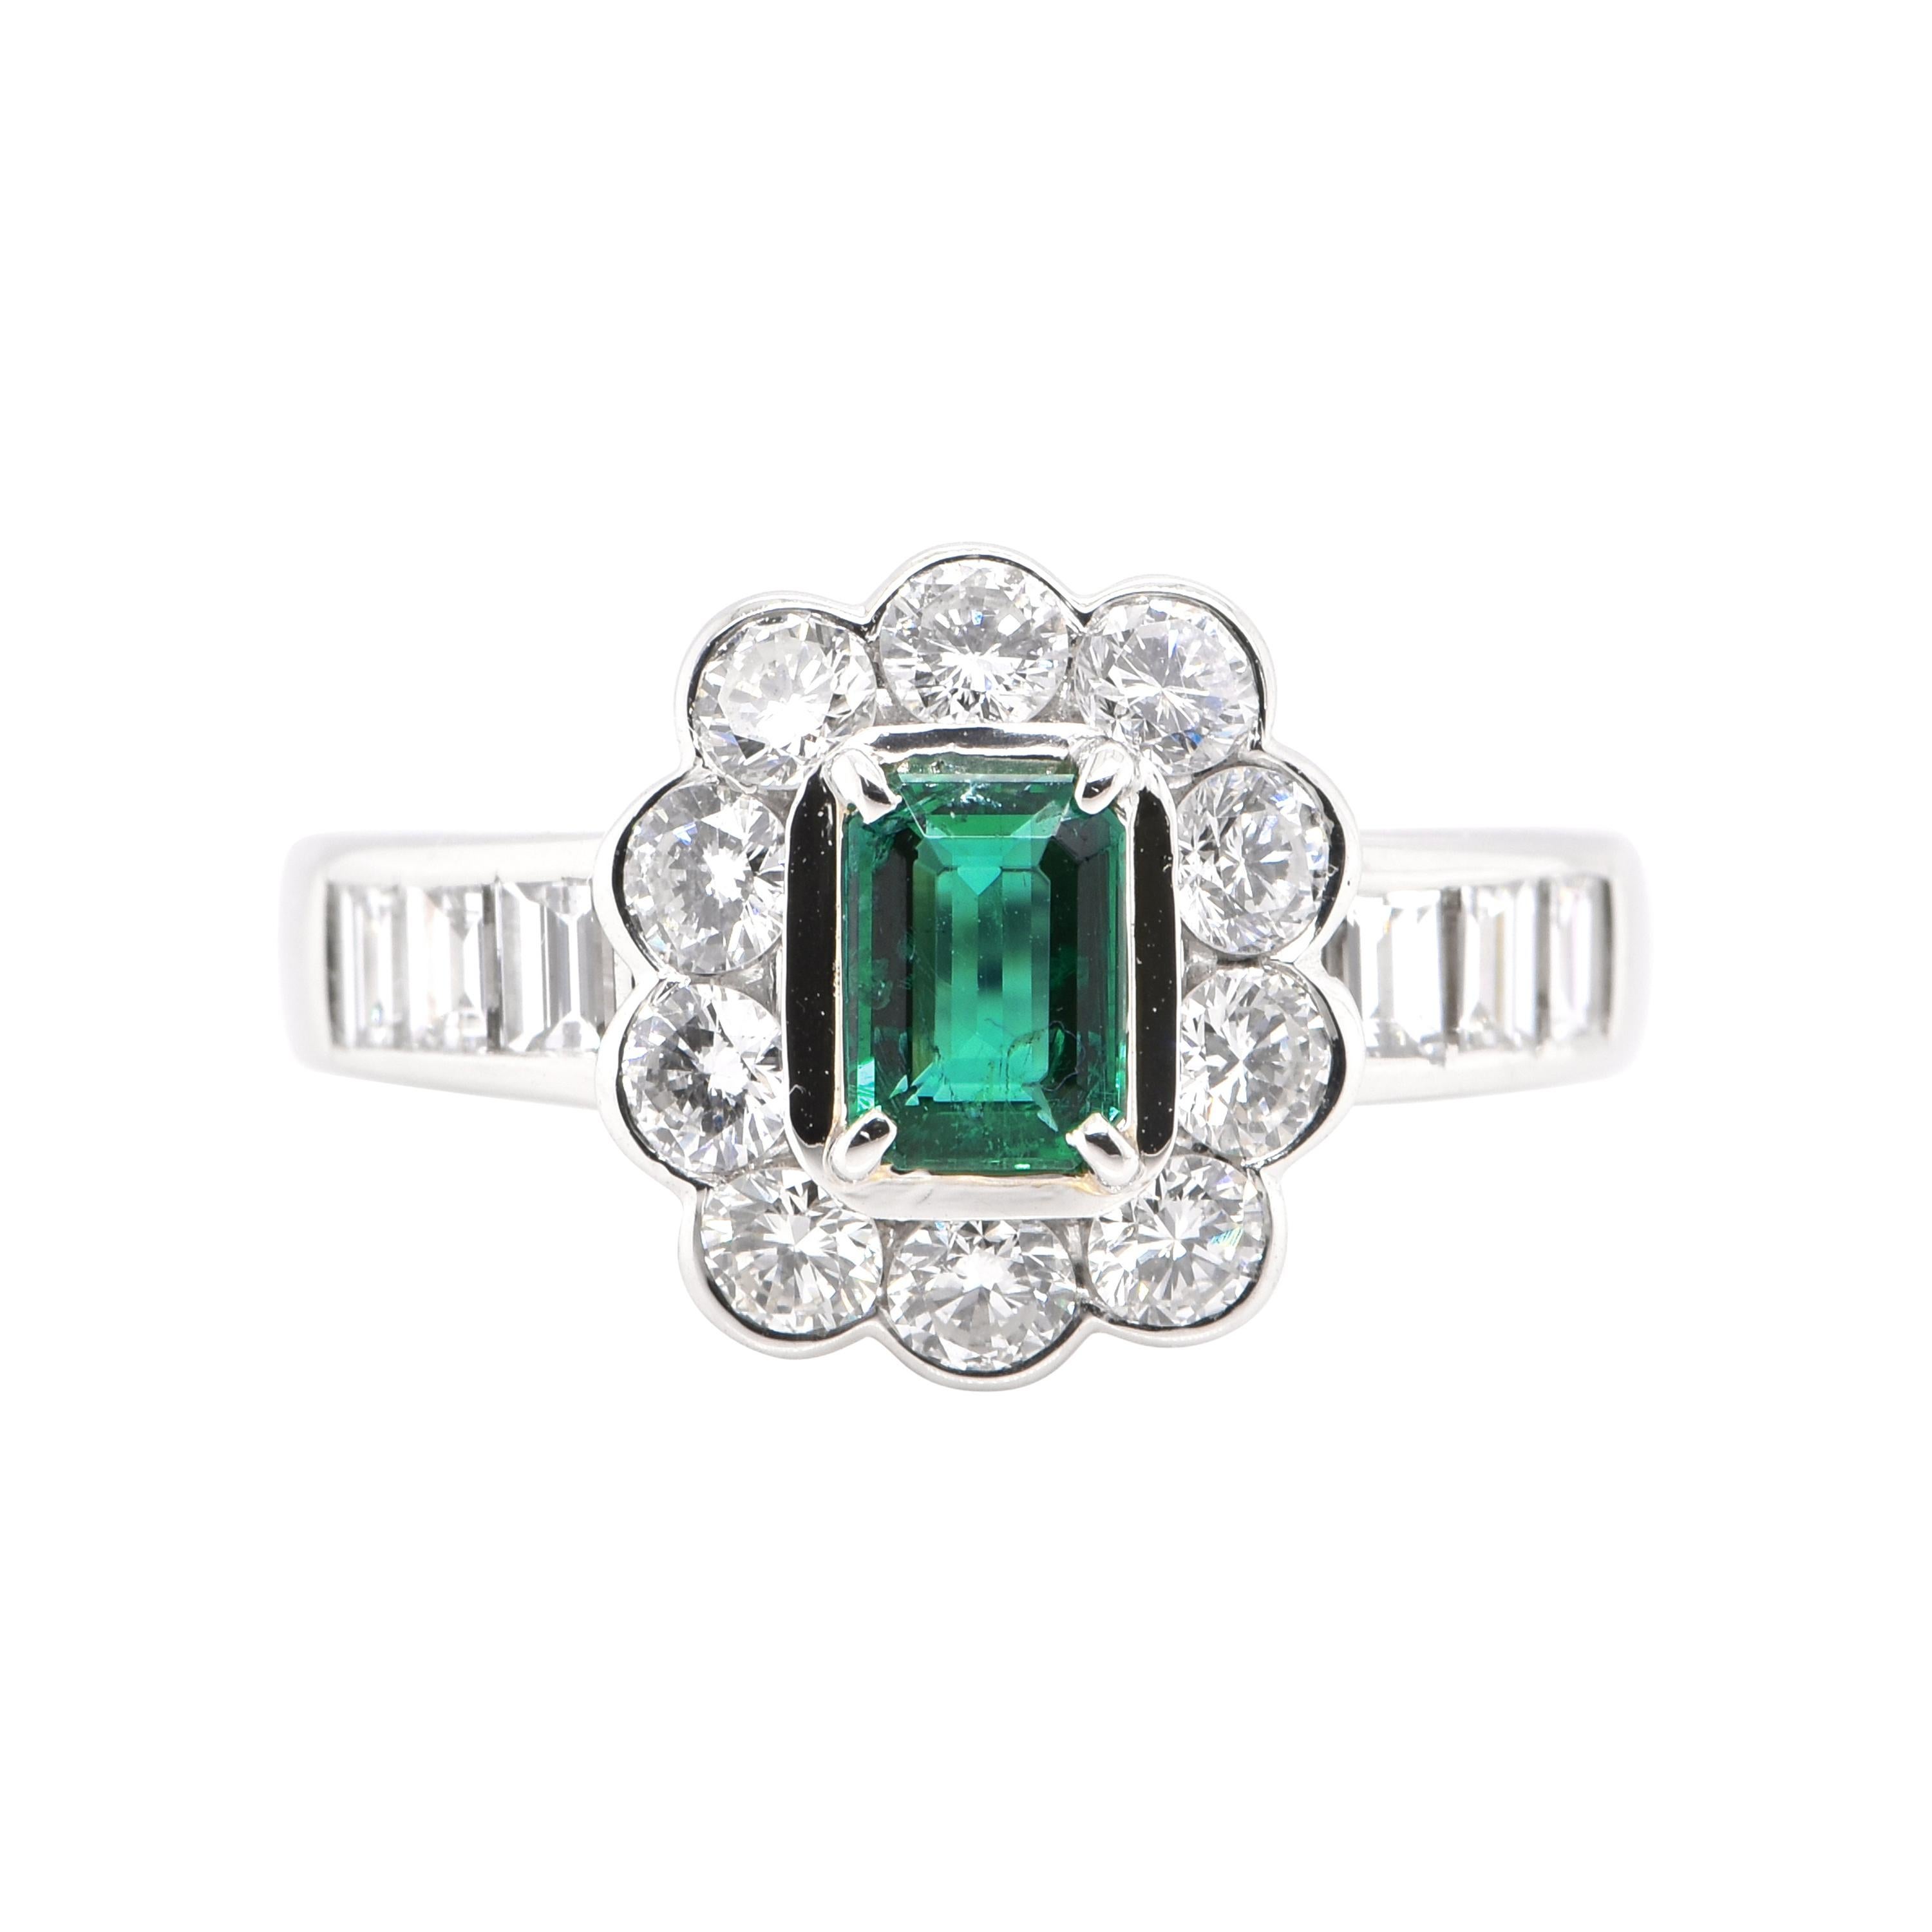 0.53 Carat Natural Colombian Emerald and Diamond Ring Set in Platinum